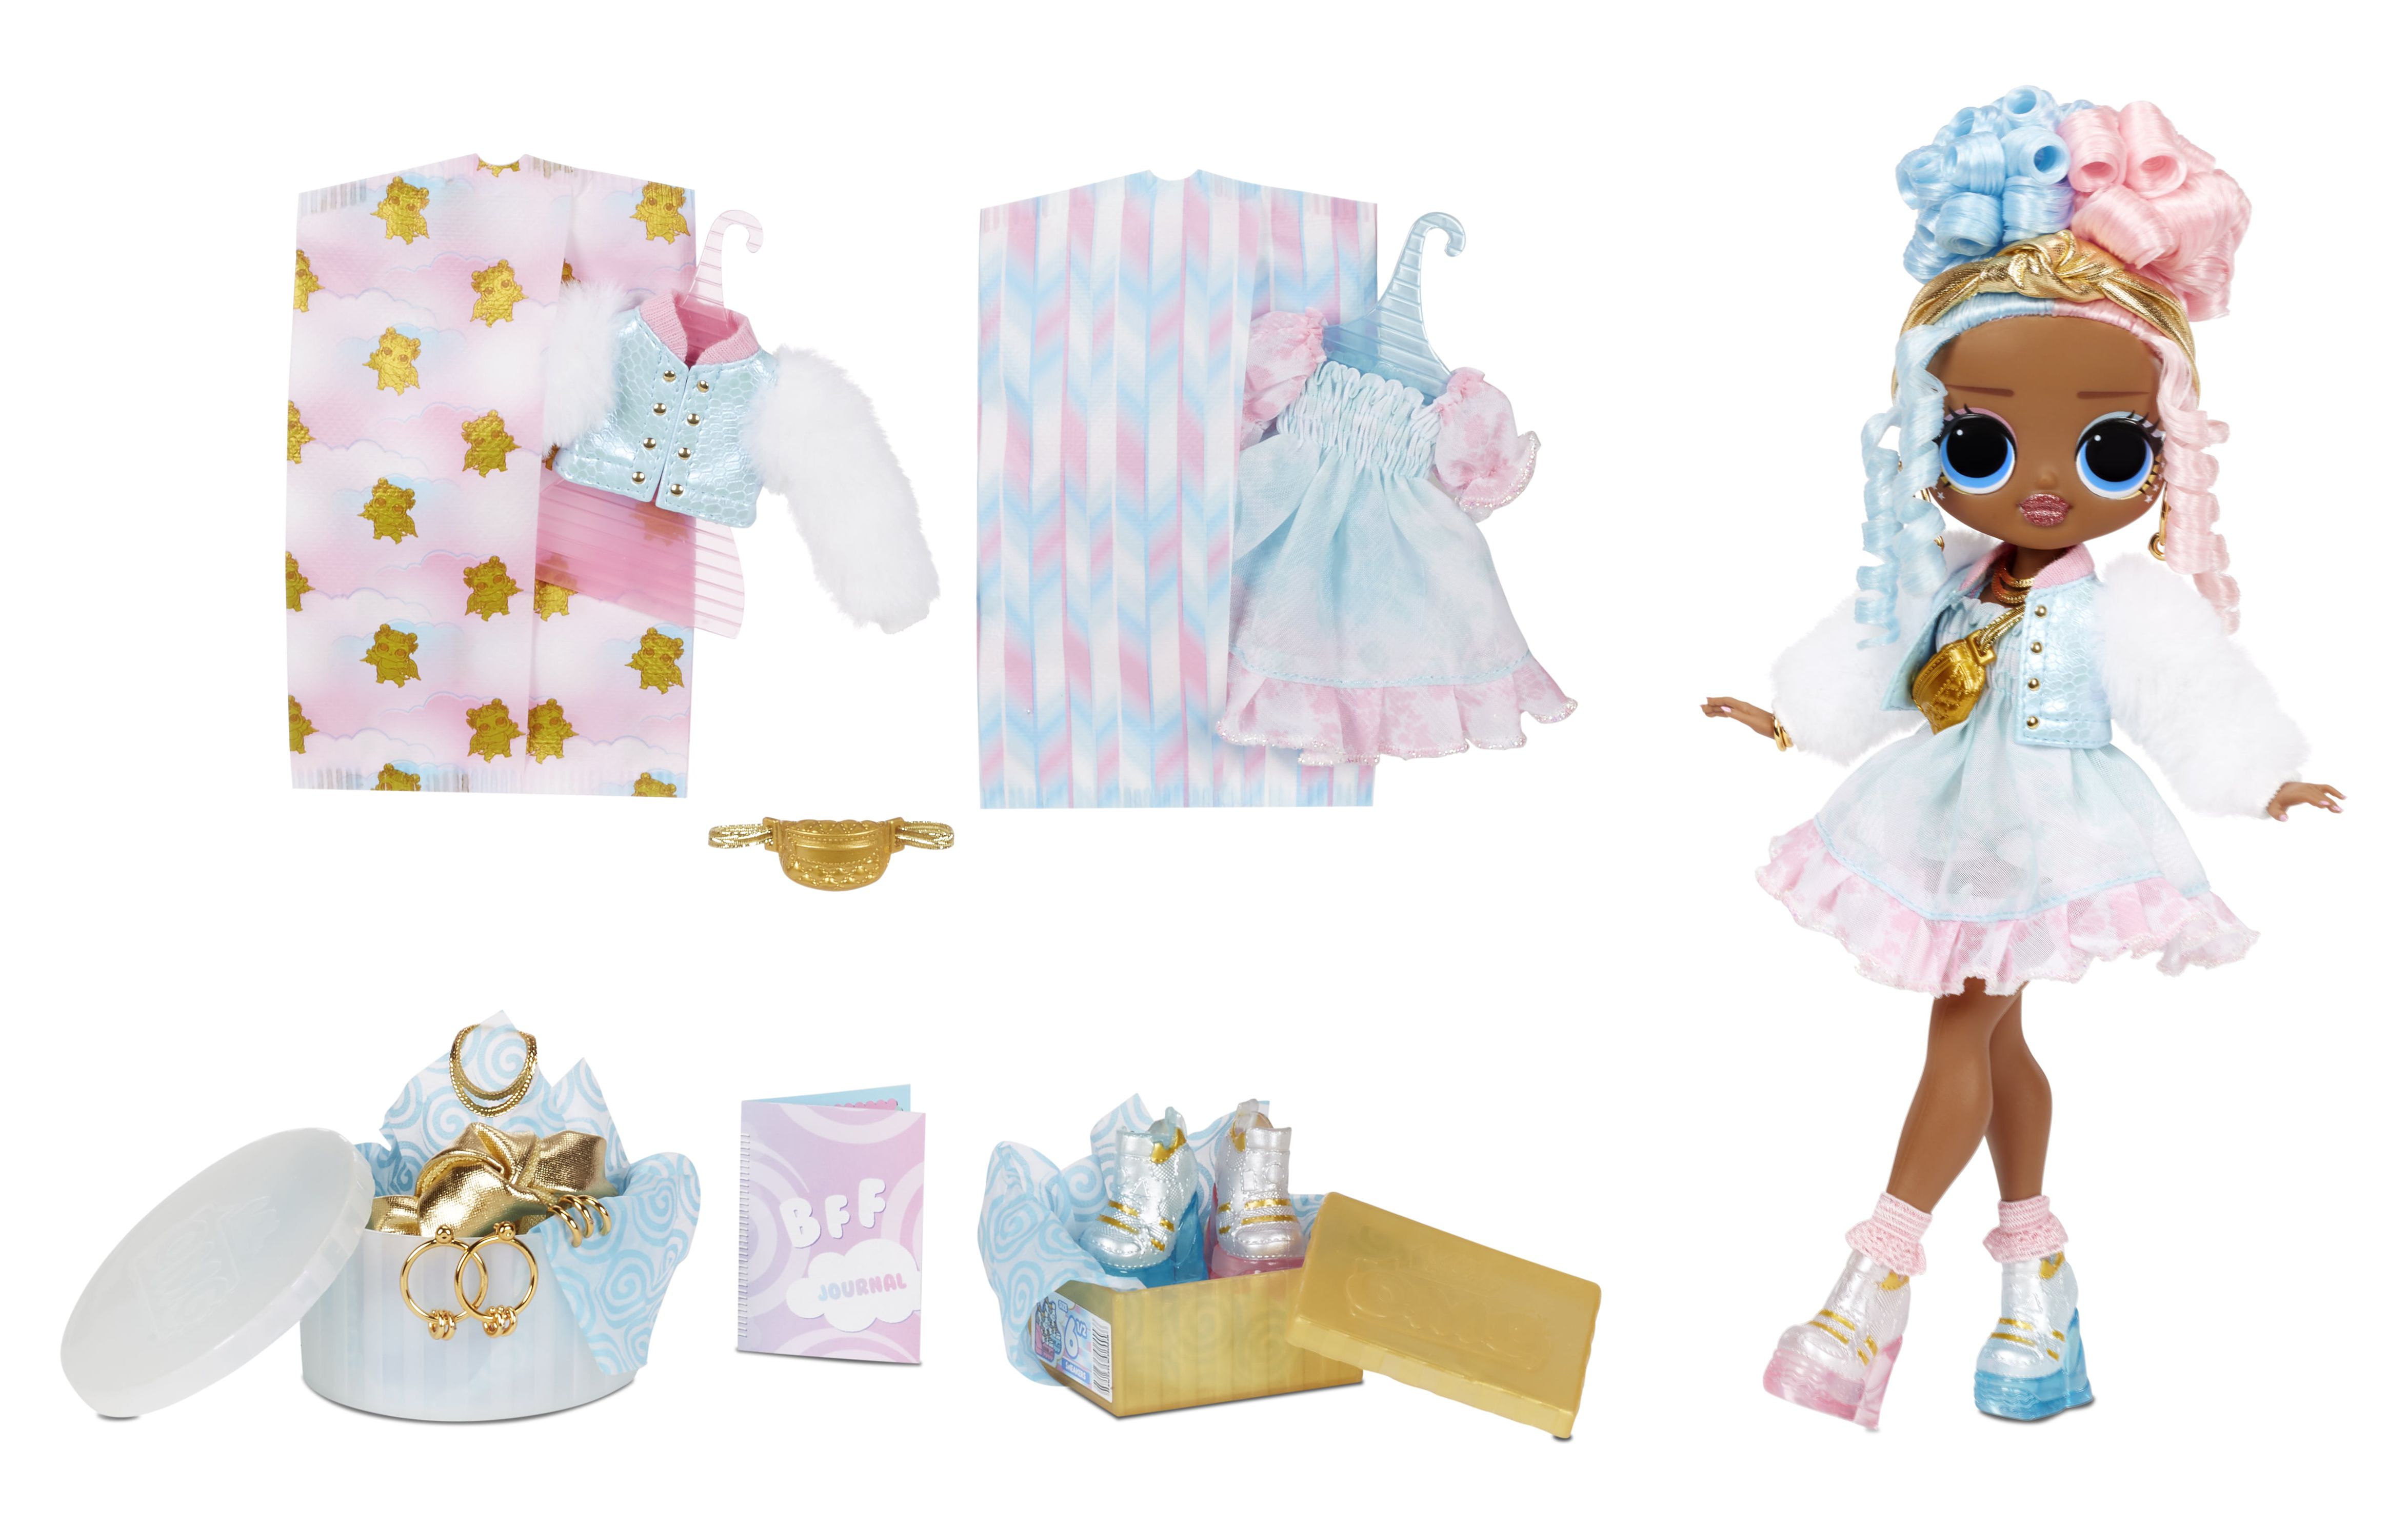 LOL Surprise OMG Sweets Fashion Doll - Dress Up Doll Set with 20 Surprises for Girls and Kids 4+ - image 4 of 8